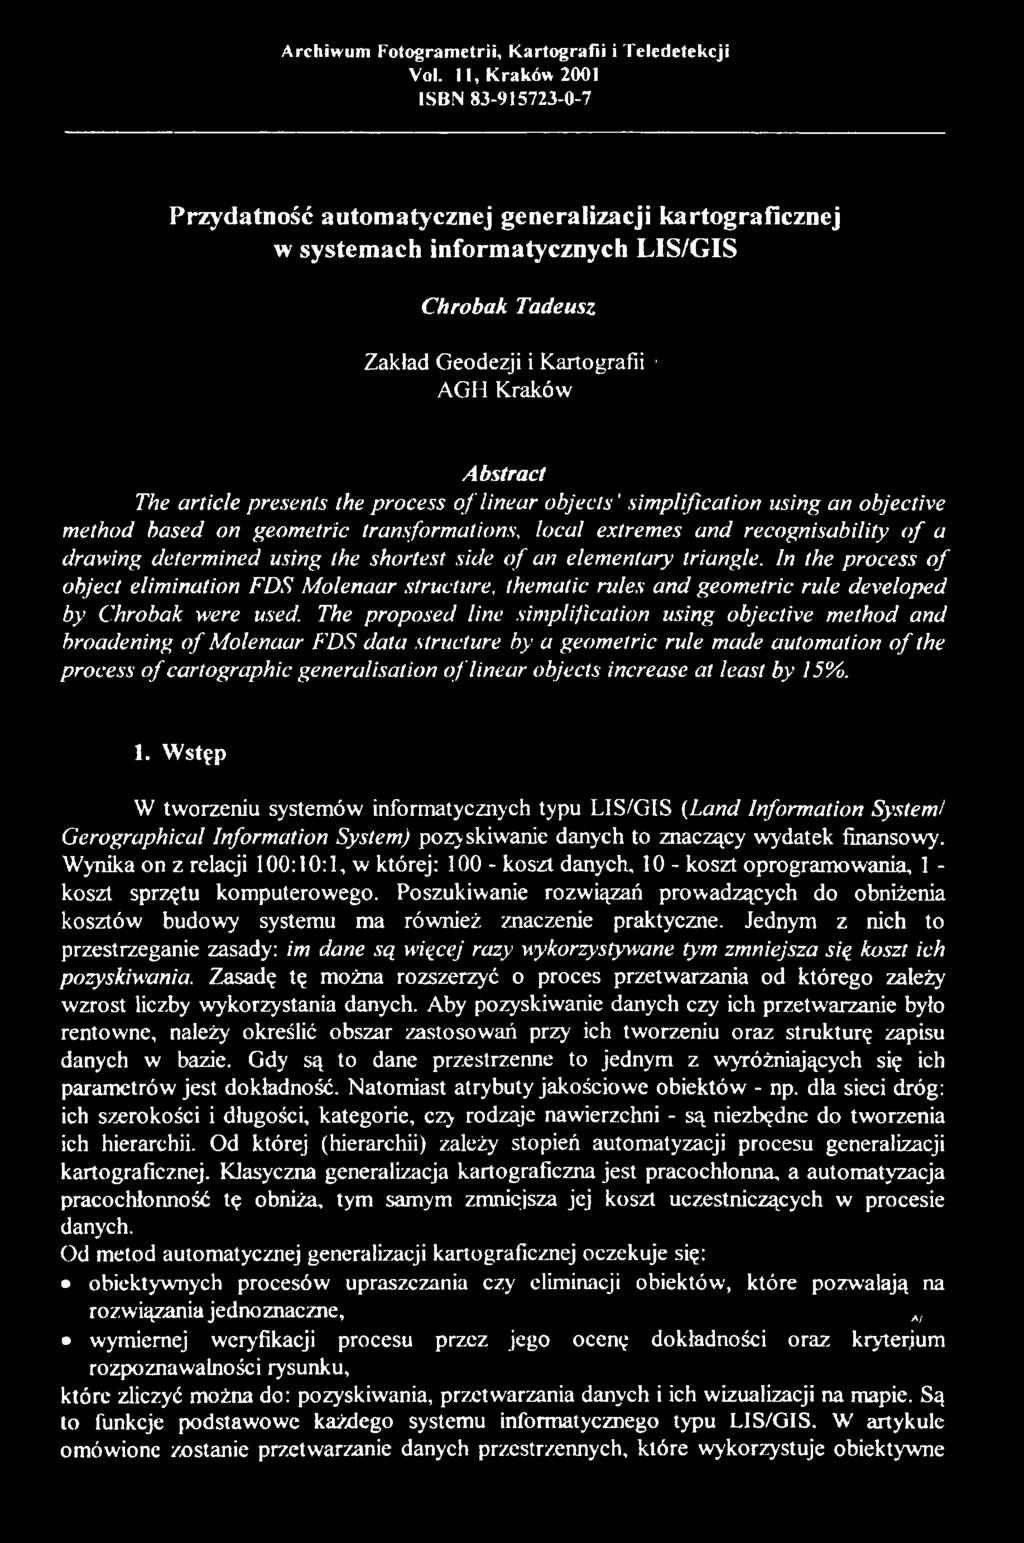 article presents the process o f linear objects' simplification using an objective method based on geometric transformations, local extremes and recognisability o f a drawing determined using the